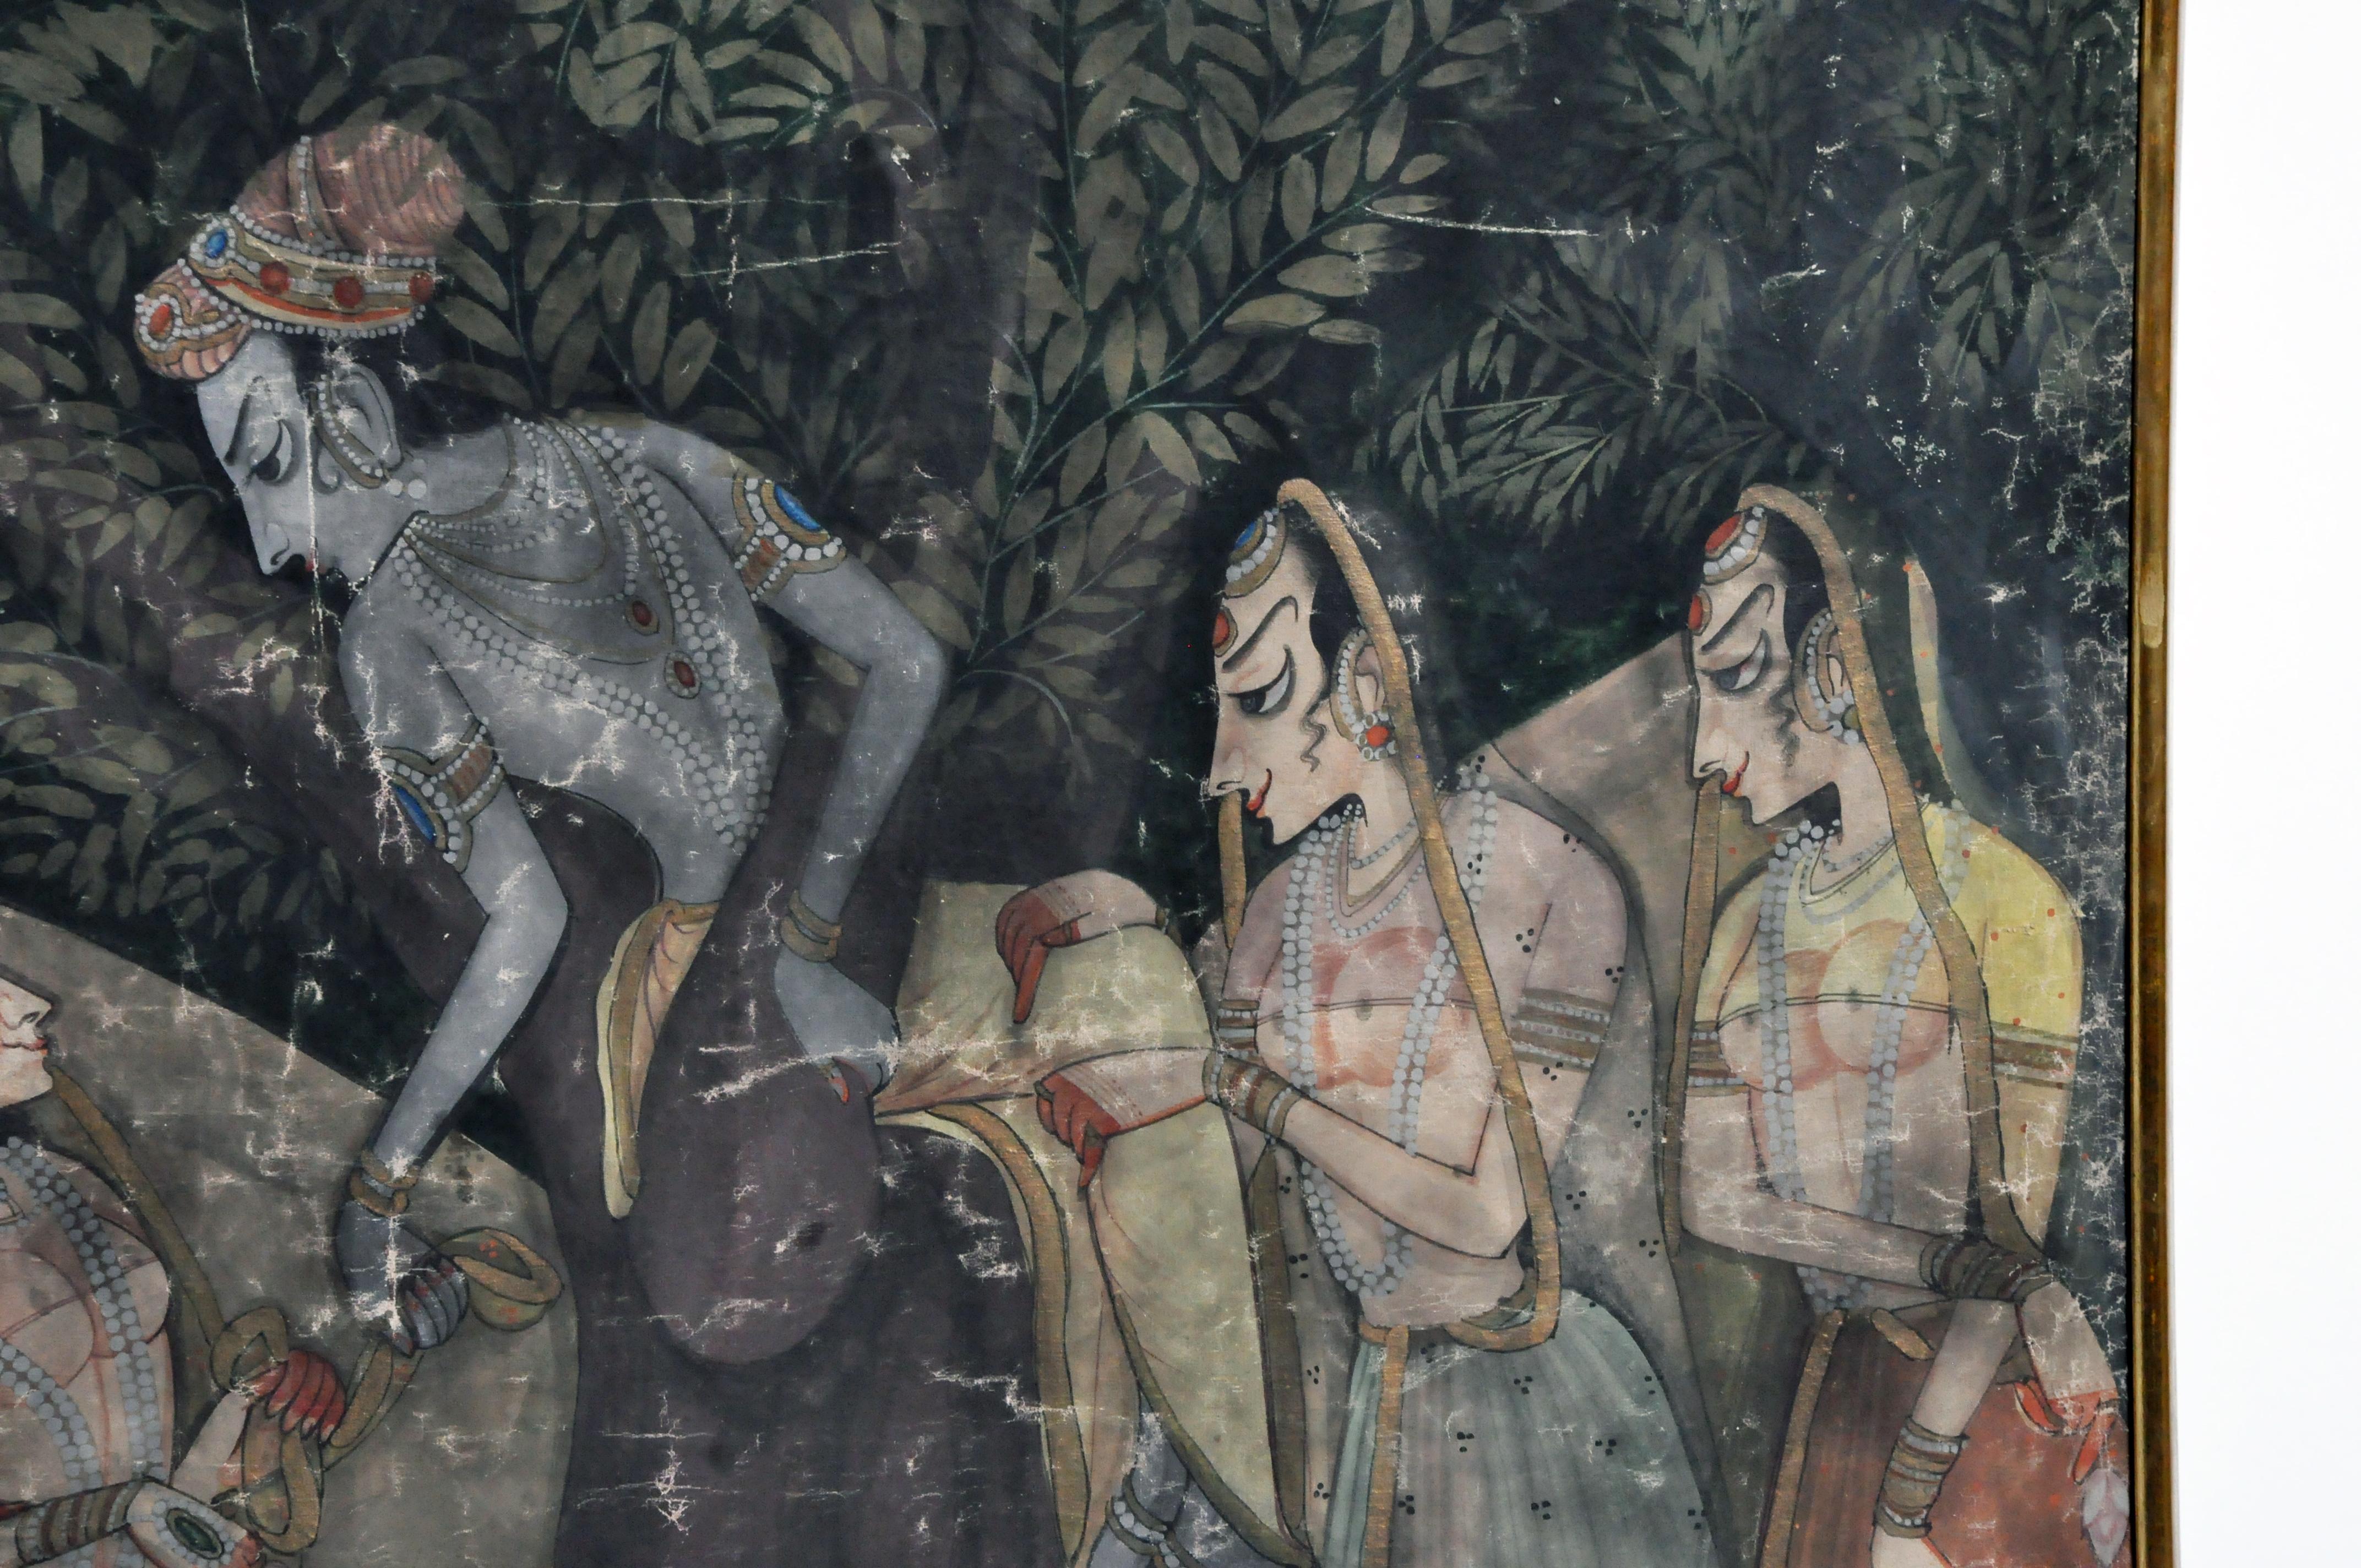 Large Gouache Painting of Krishna with Female Gopis Dancing 1